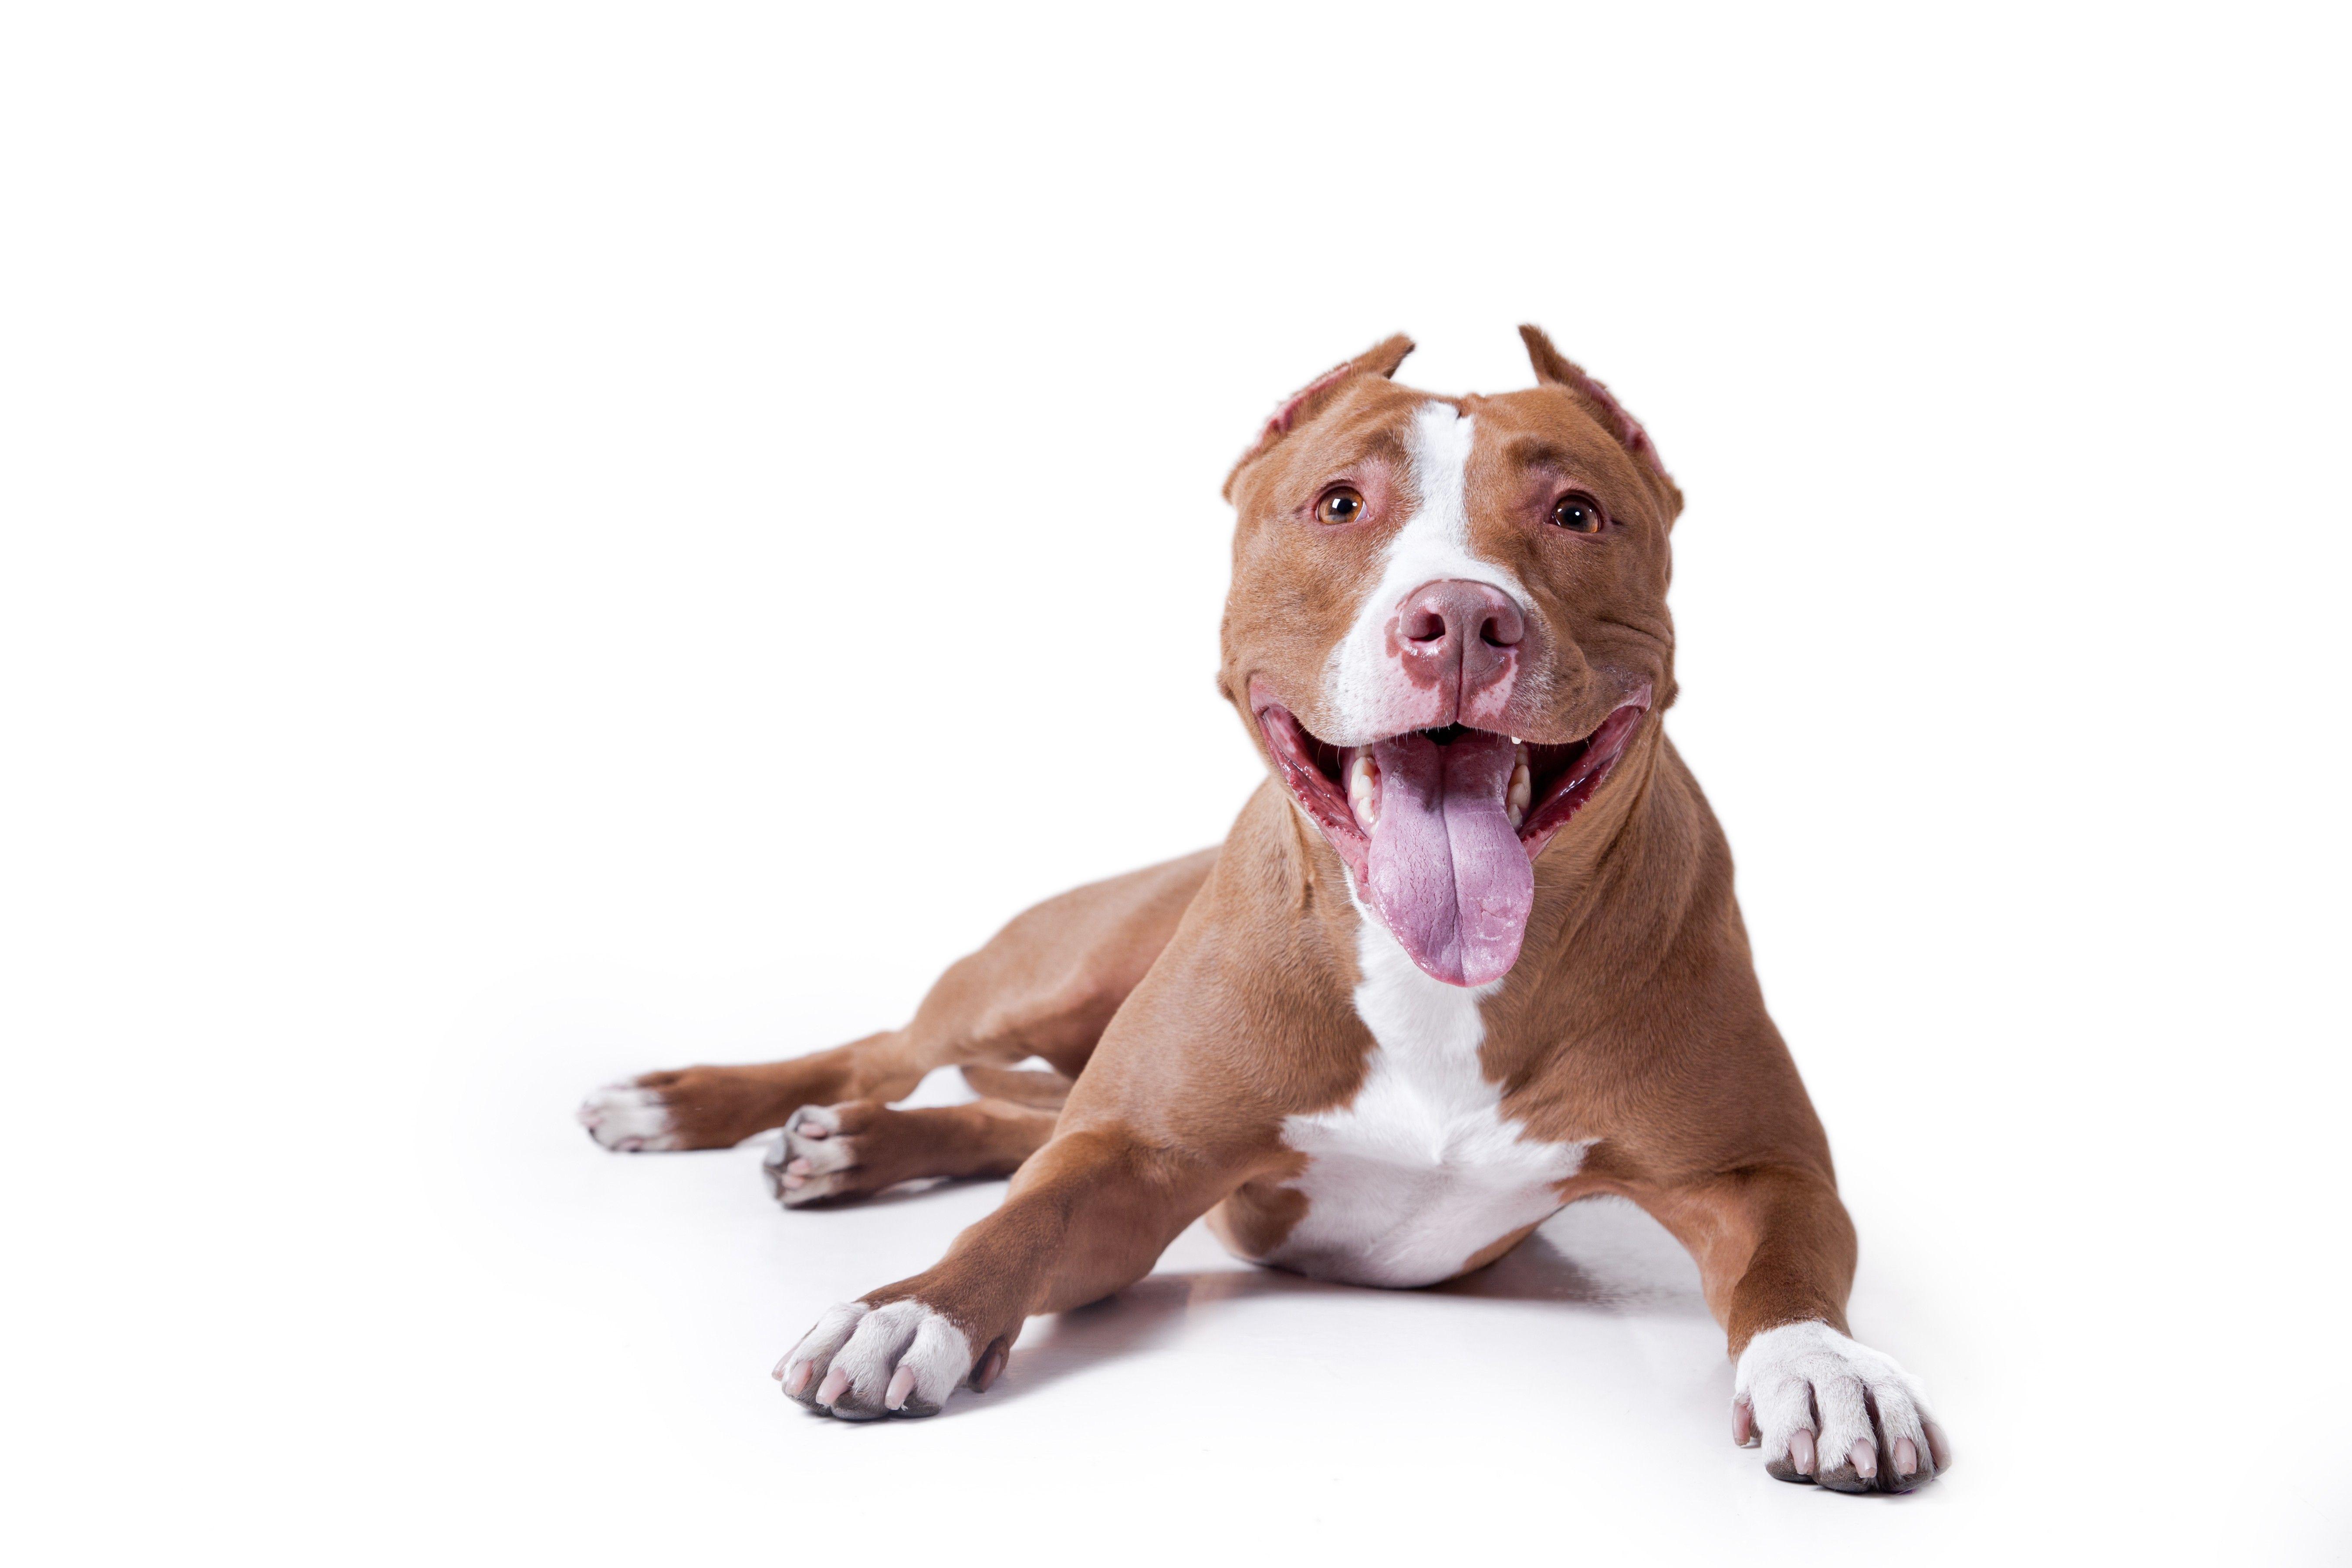 Local dog trainers want to share some facts with you about pit bulls